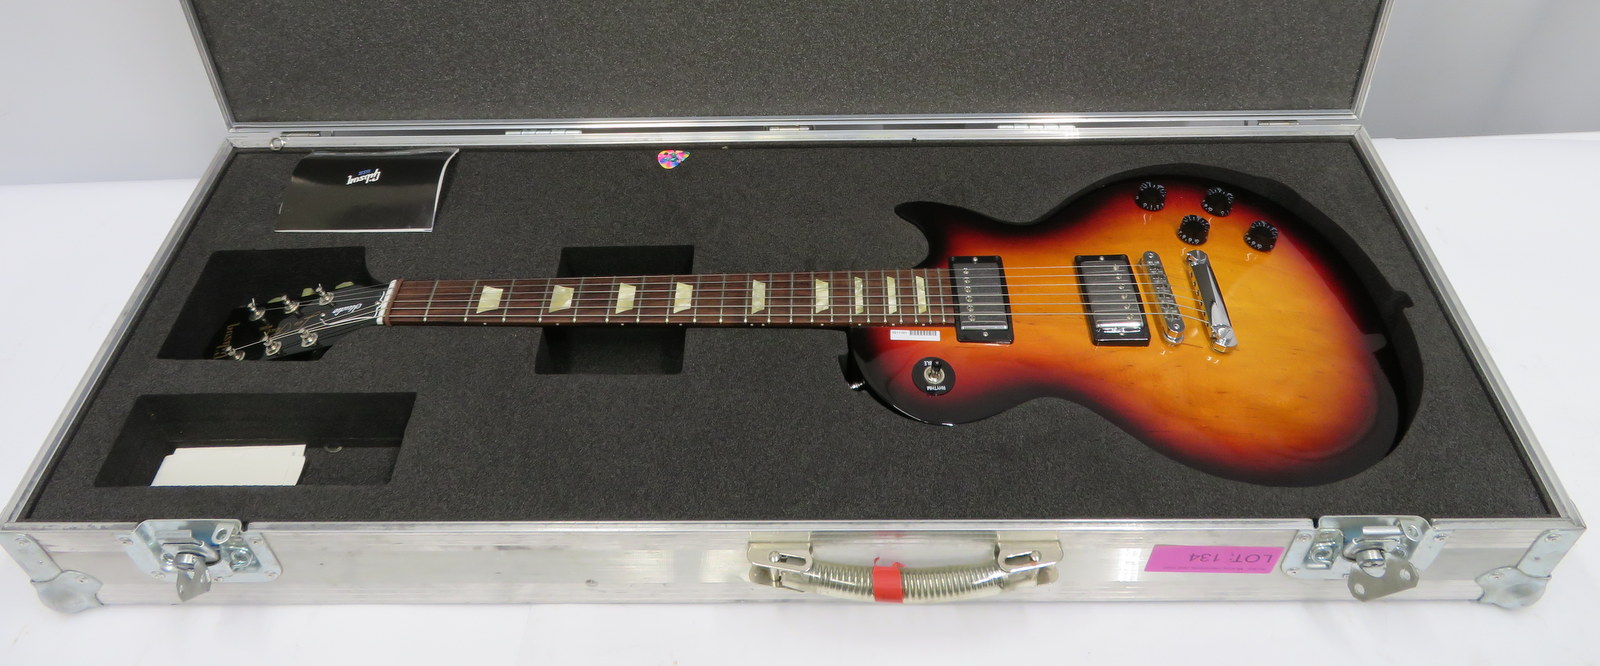 Gibson Les Paul electric guitar in flight case. Serial number: 124200693.